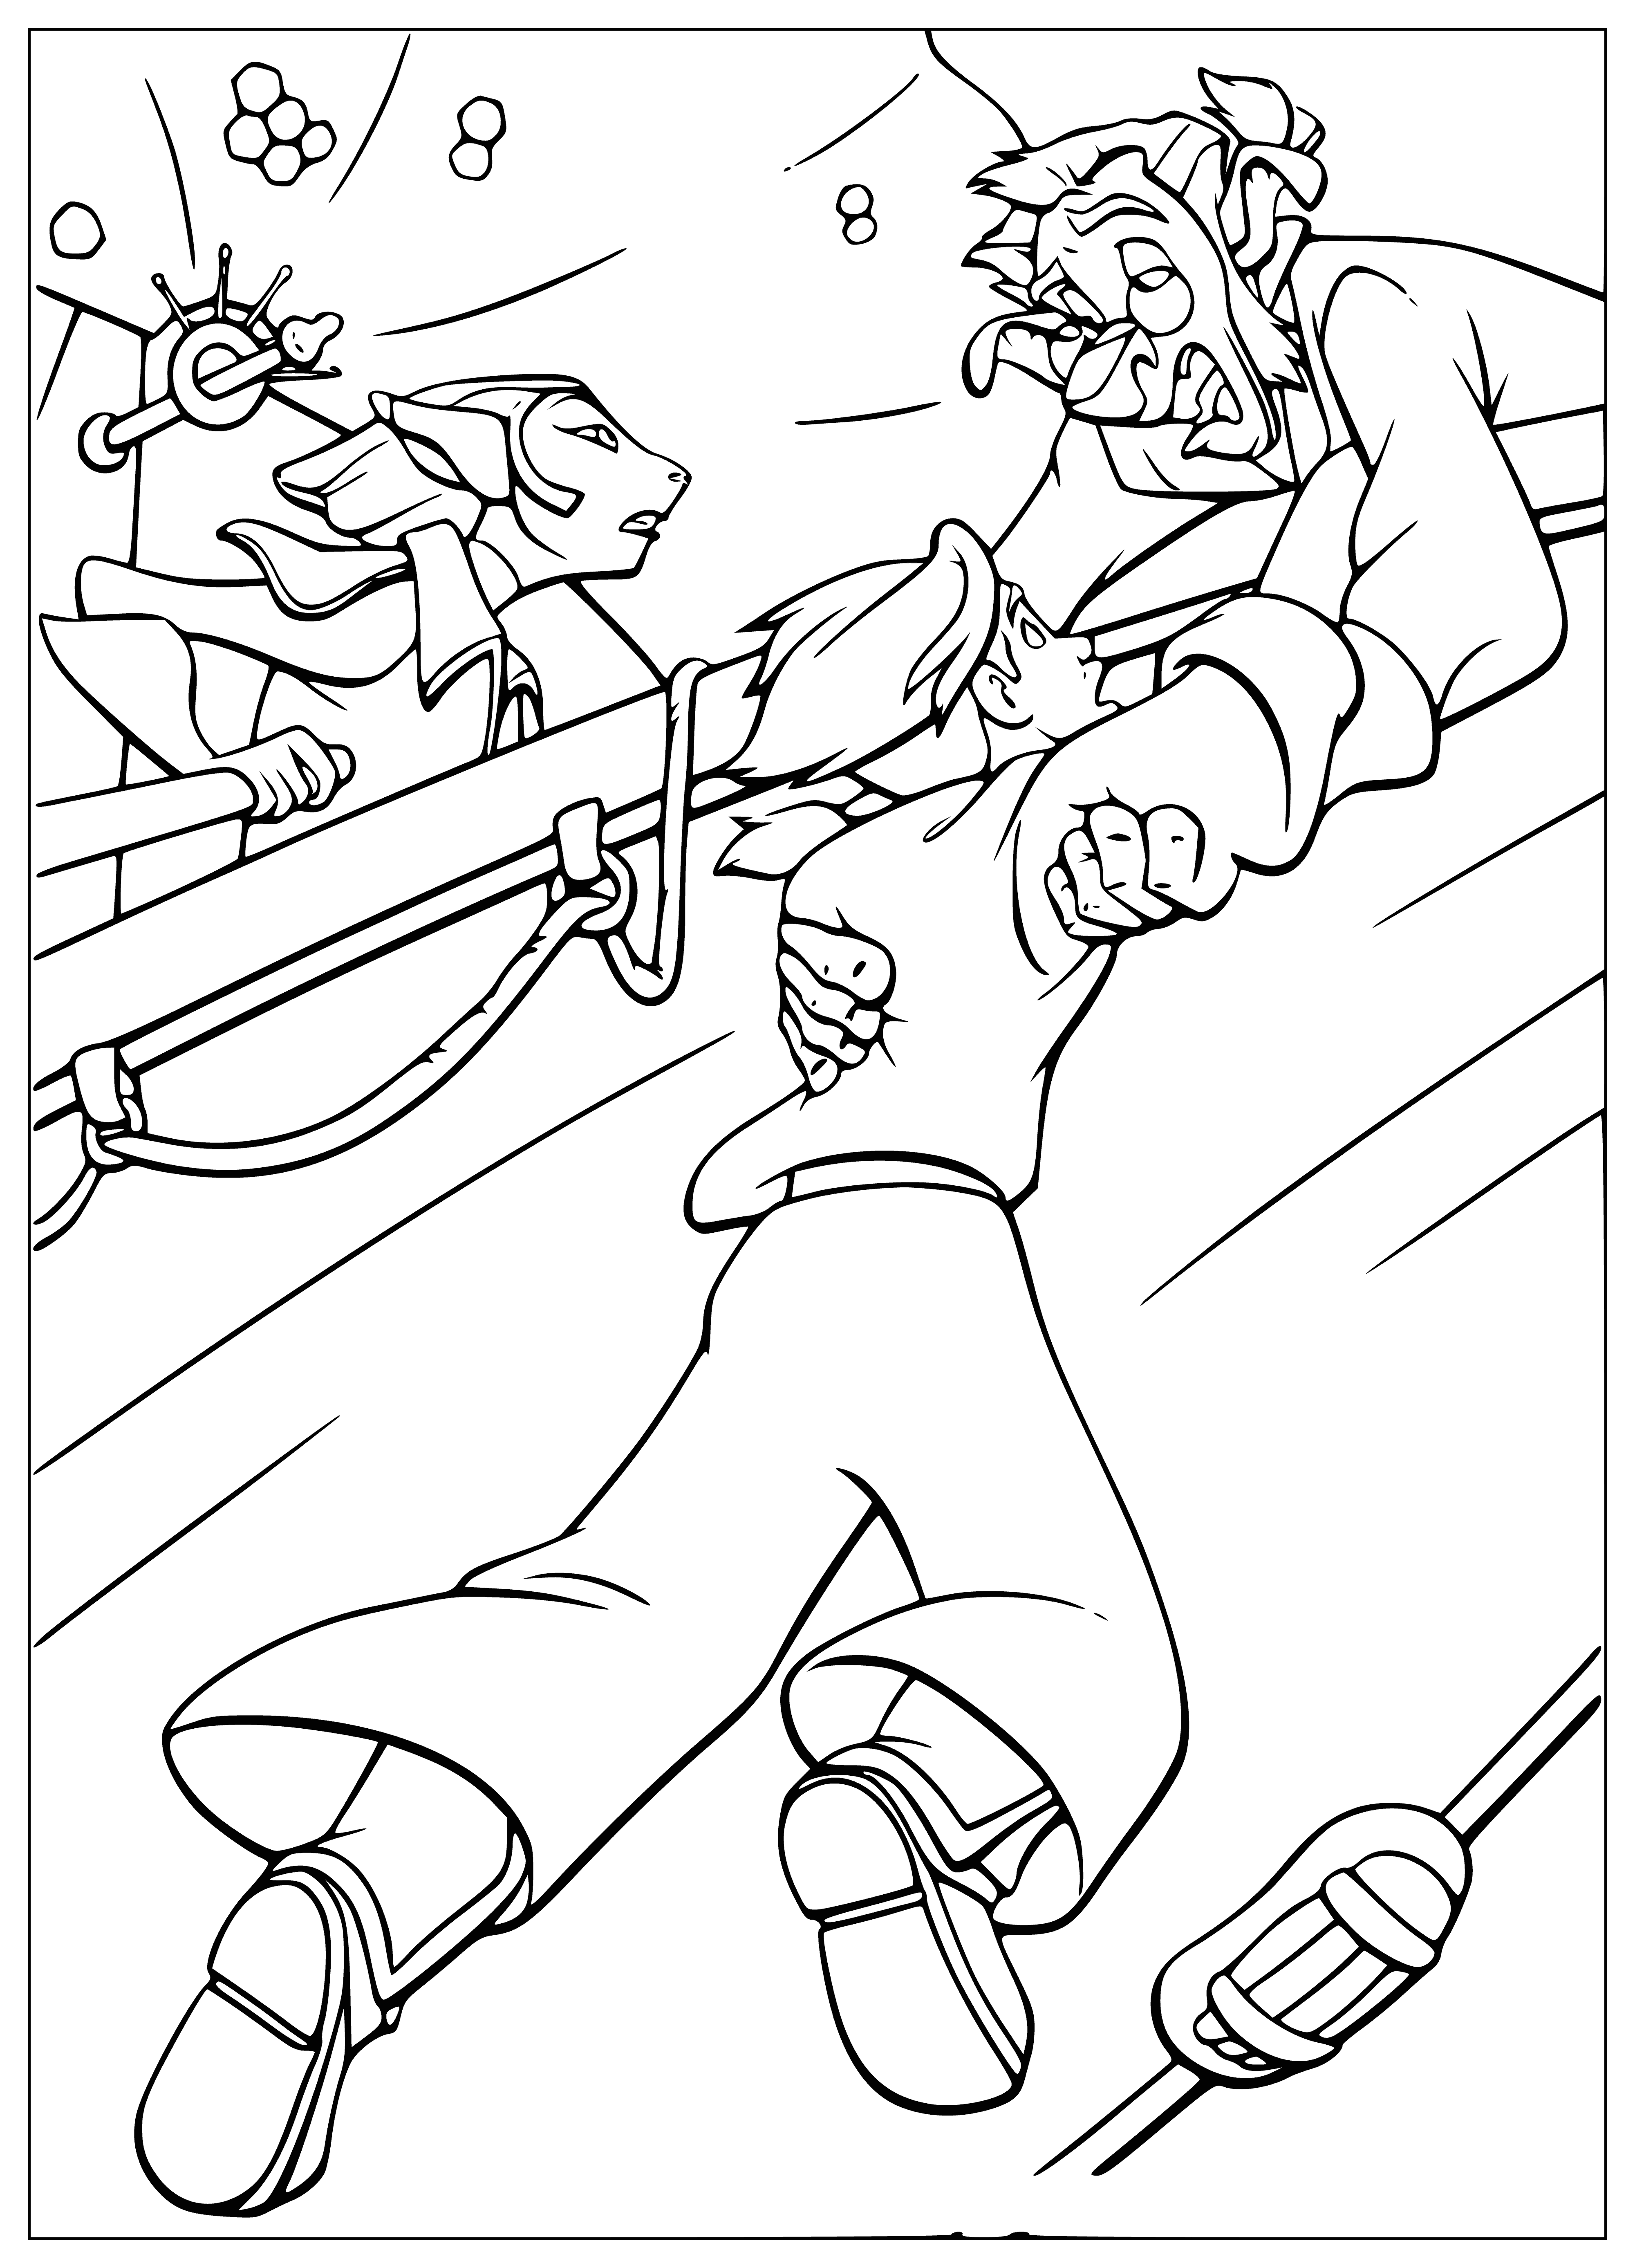 coloring page: Boy climbs tall, pointy mountain with thin rope, looks like he's about to fall.